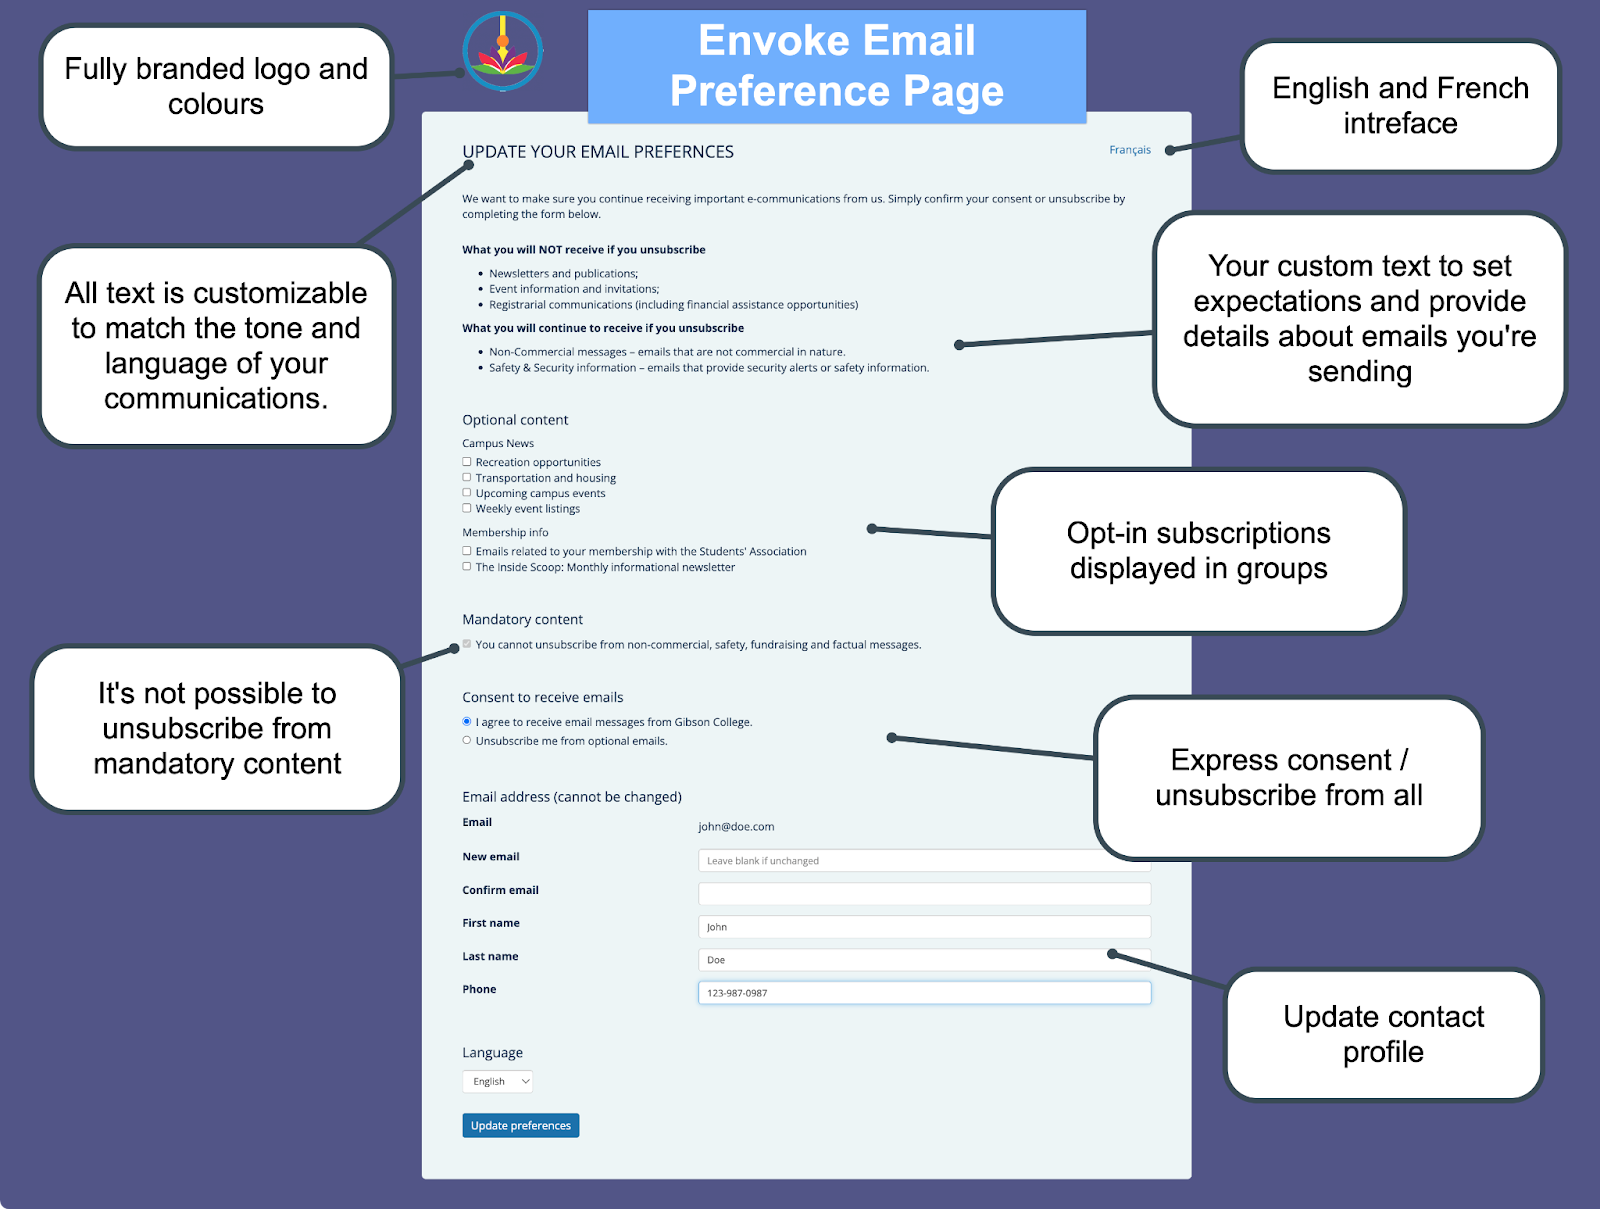 Envoke's customizable email preference page